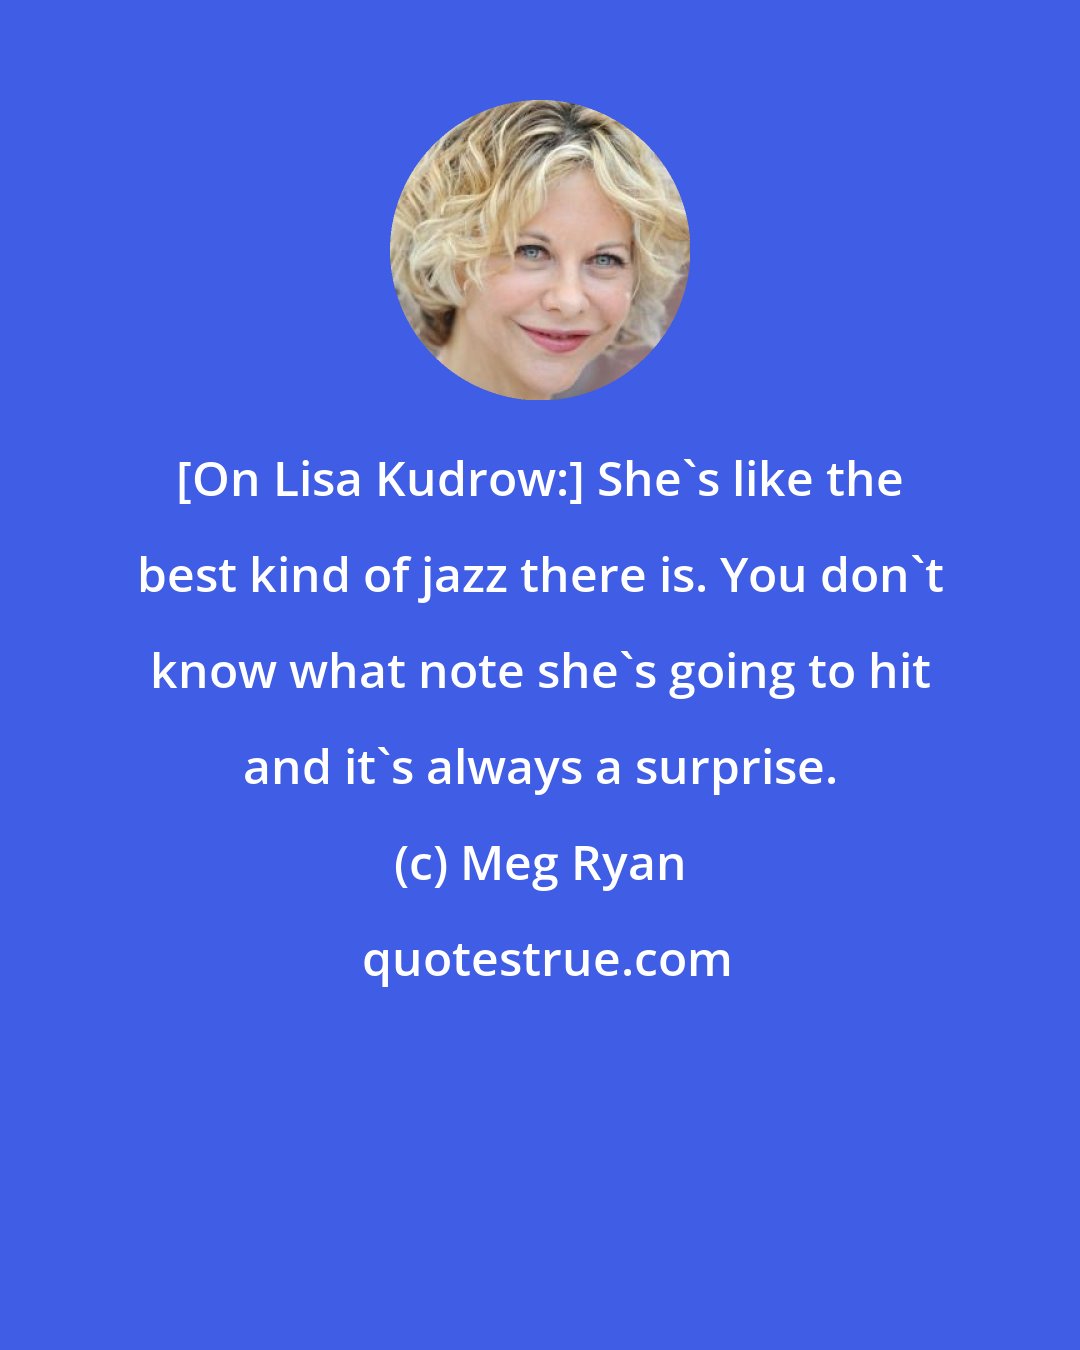 Meg Ryan: [On Lisa Kudrow:] She's like the best kind of jazz there is. You don't know what note she's going to hit and it's always a surprise.